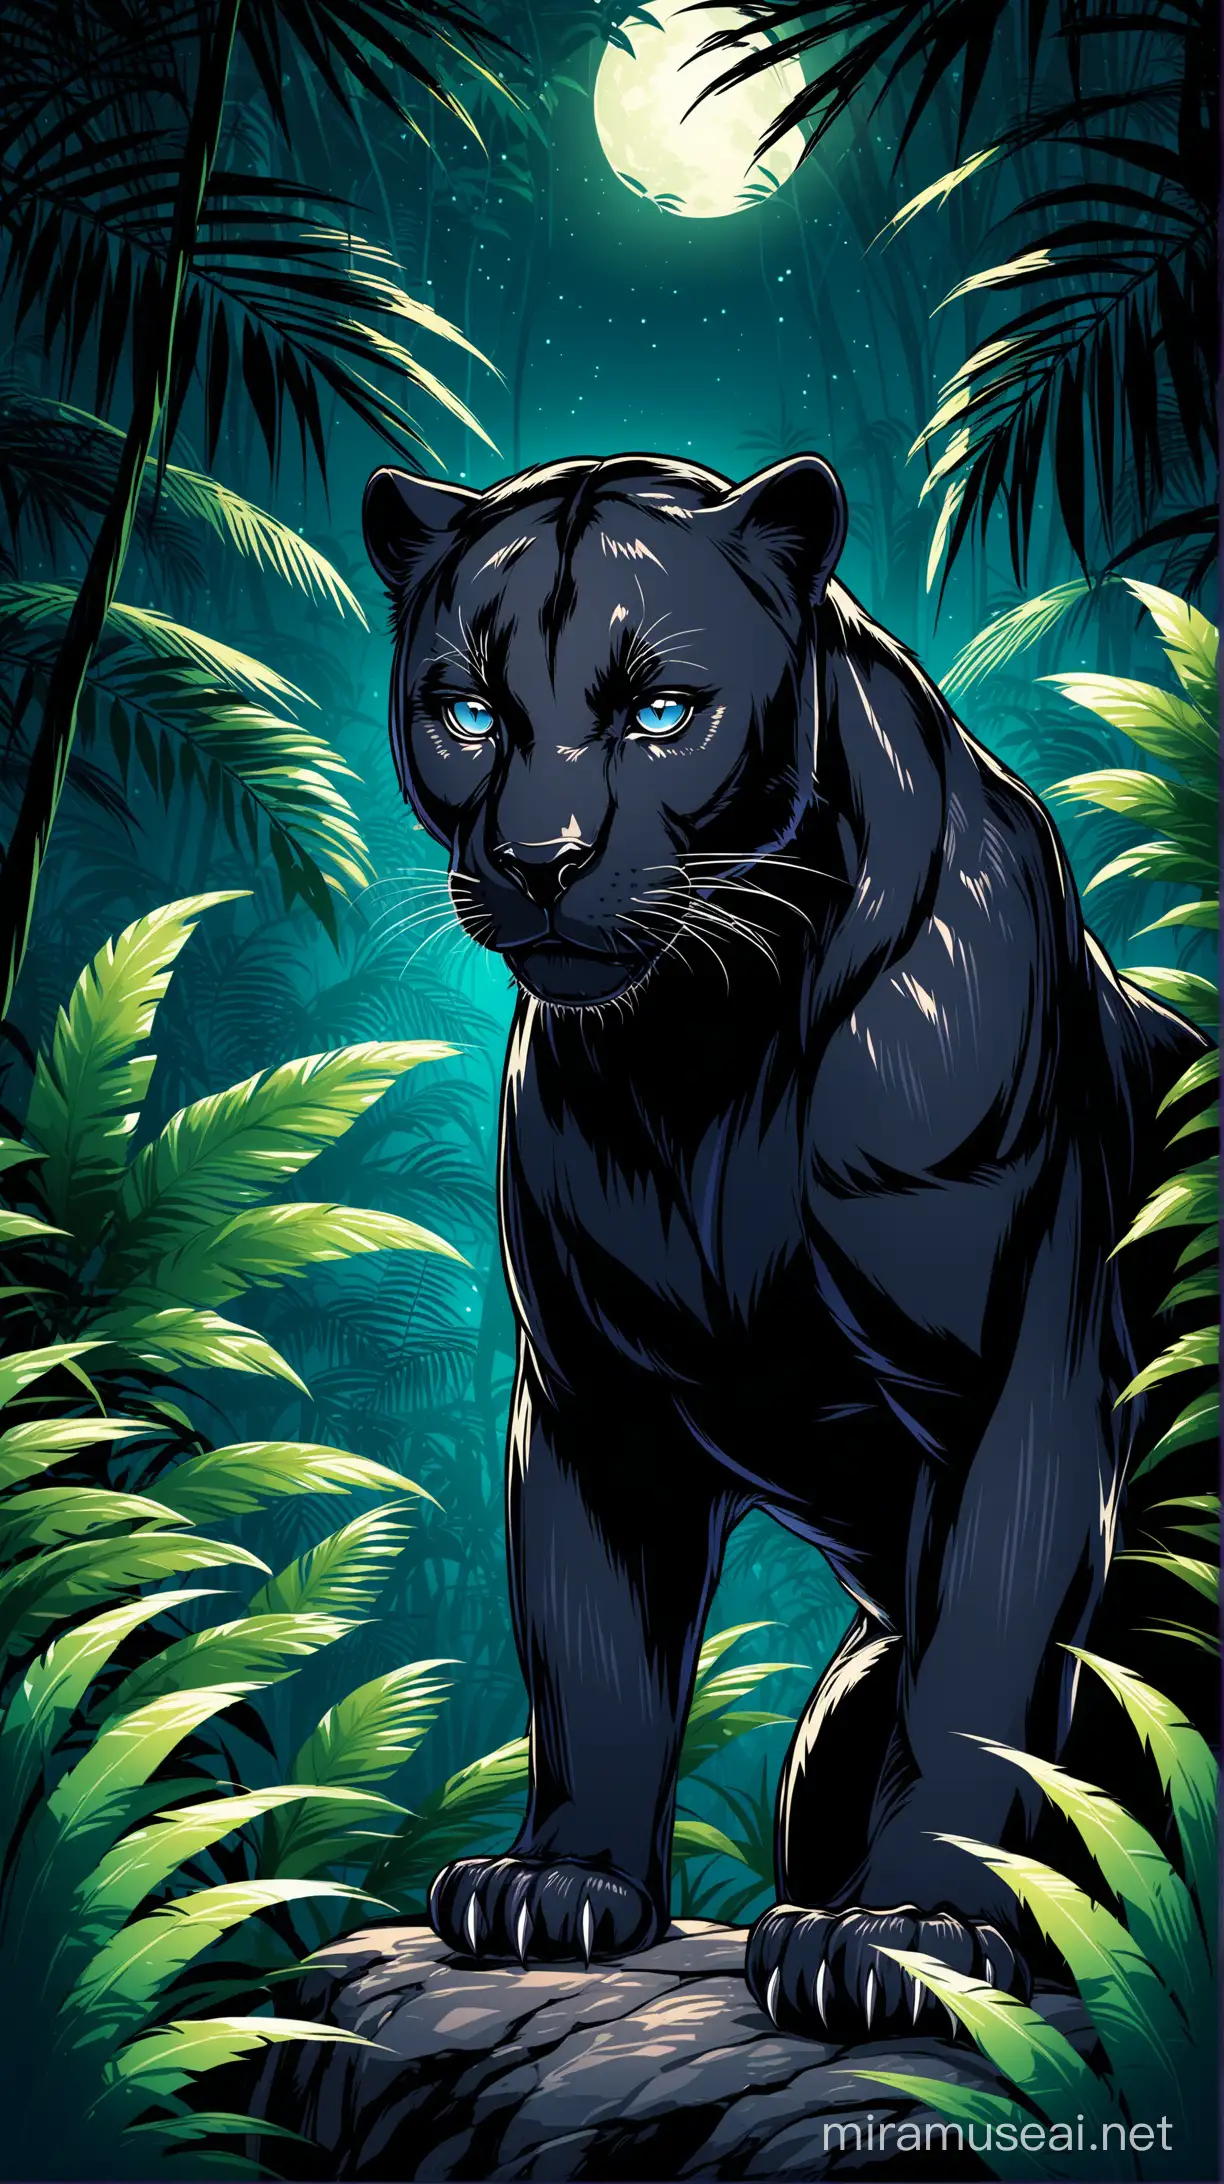 Black panther vector. Night time jungle background